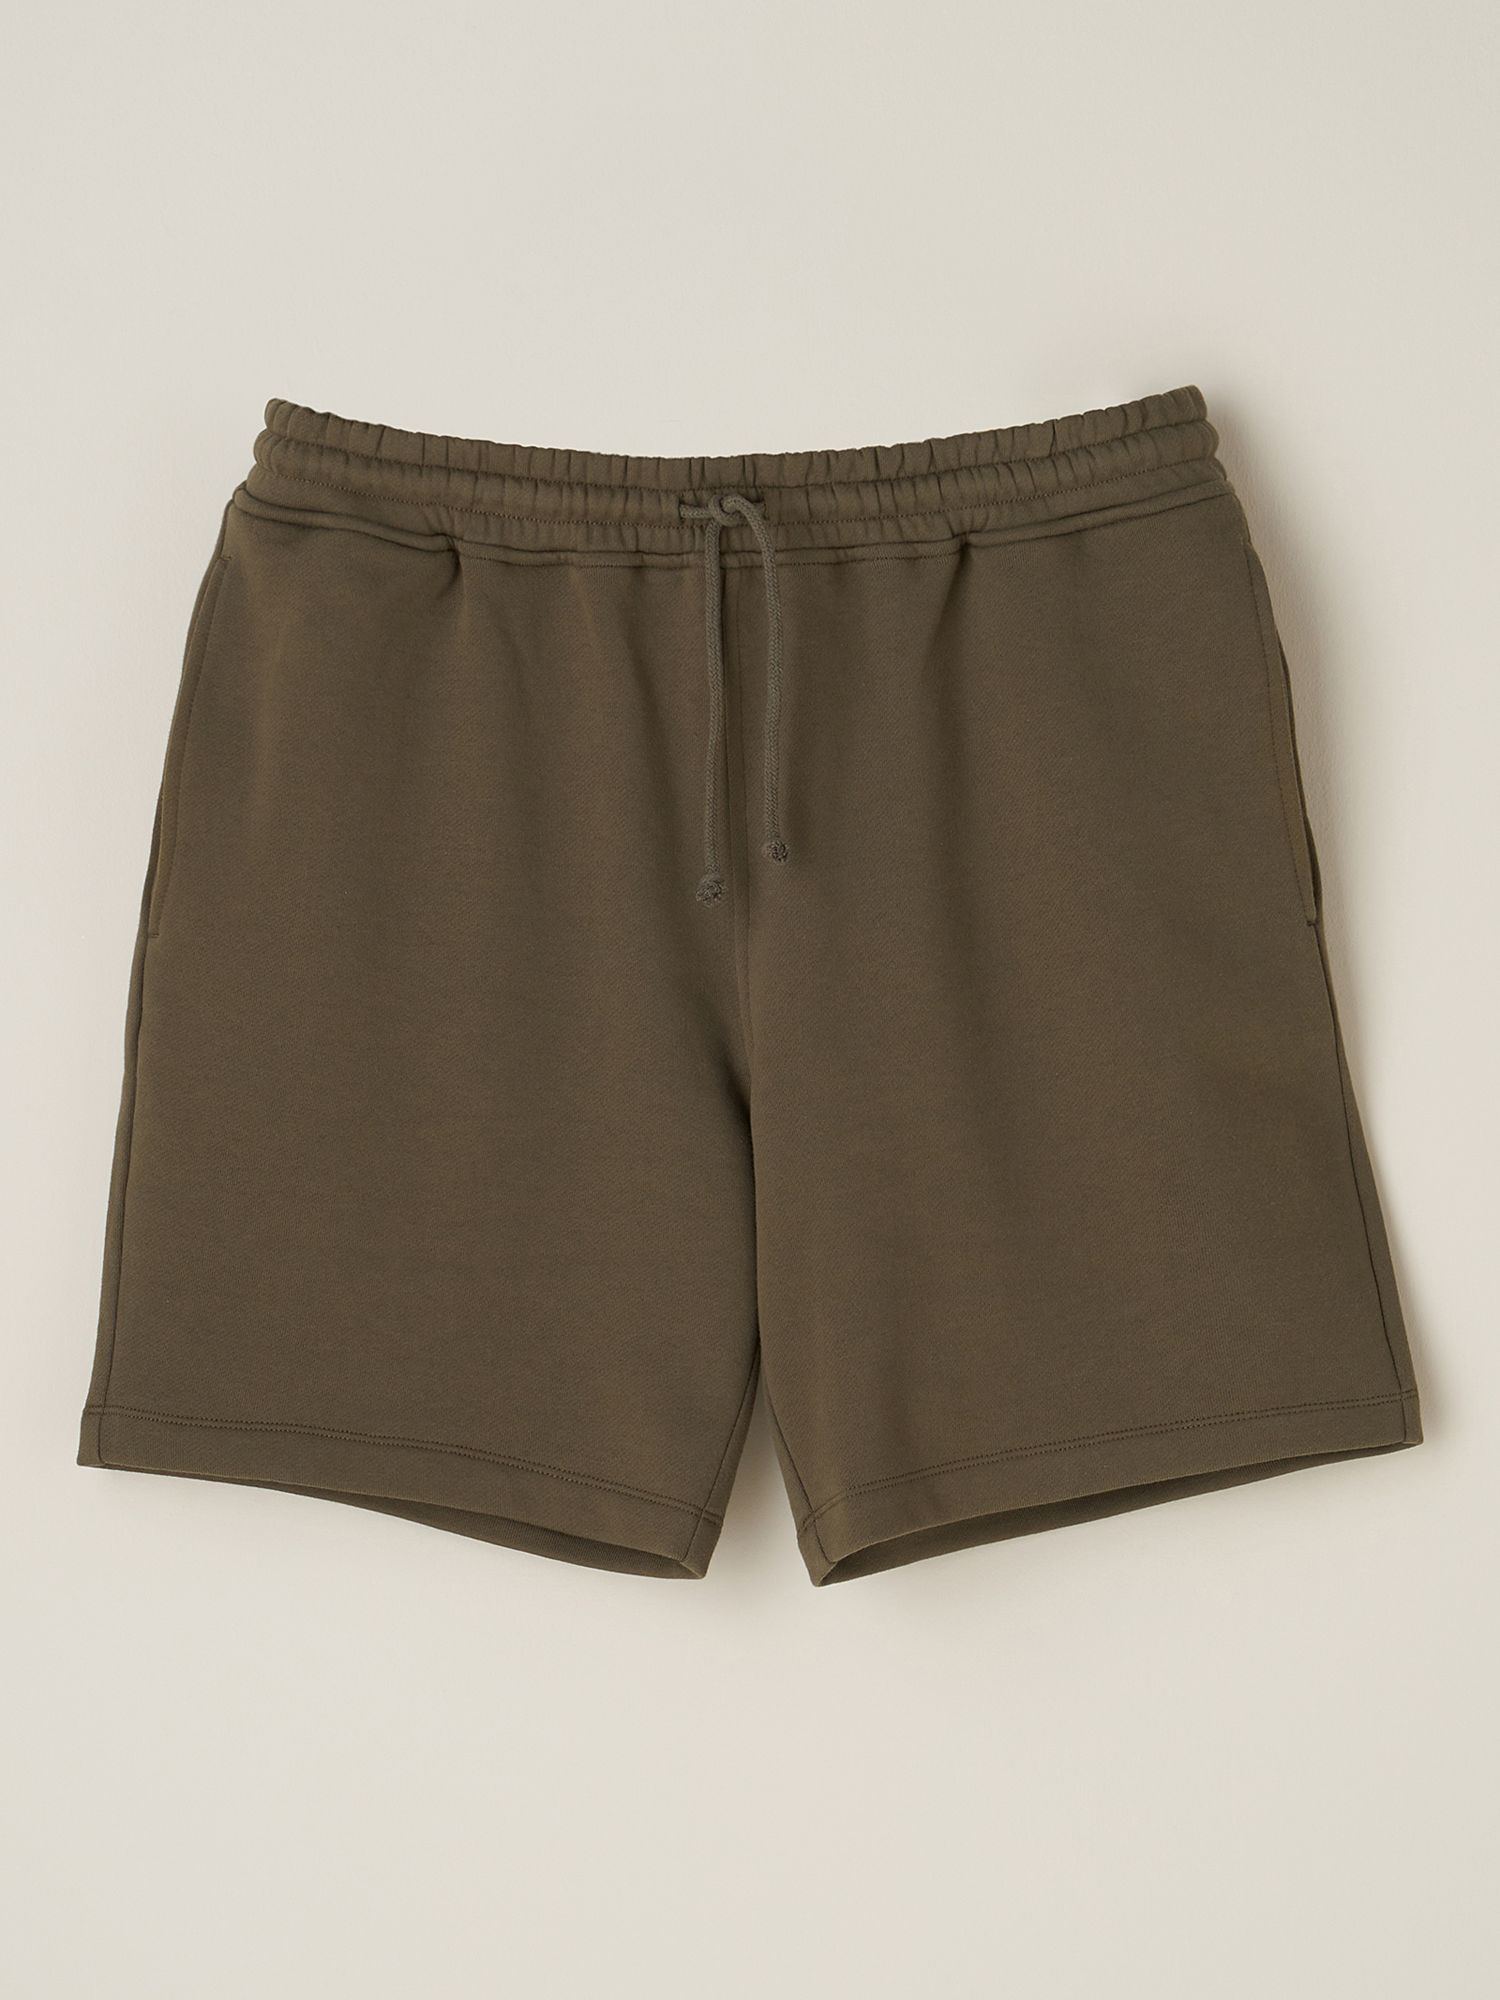 Buy Truly Shorts Online at johnlewis.com